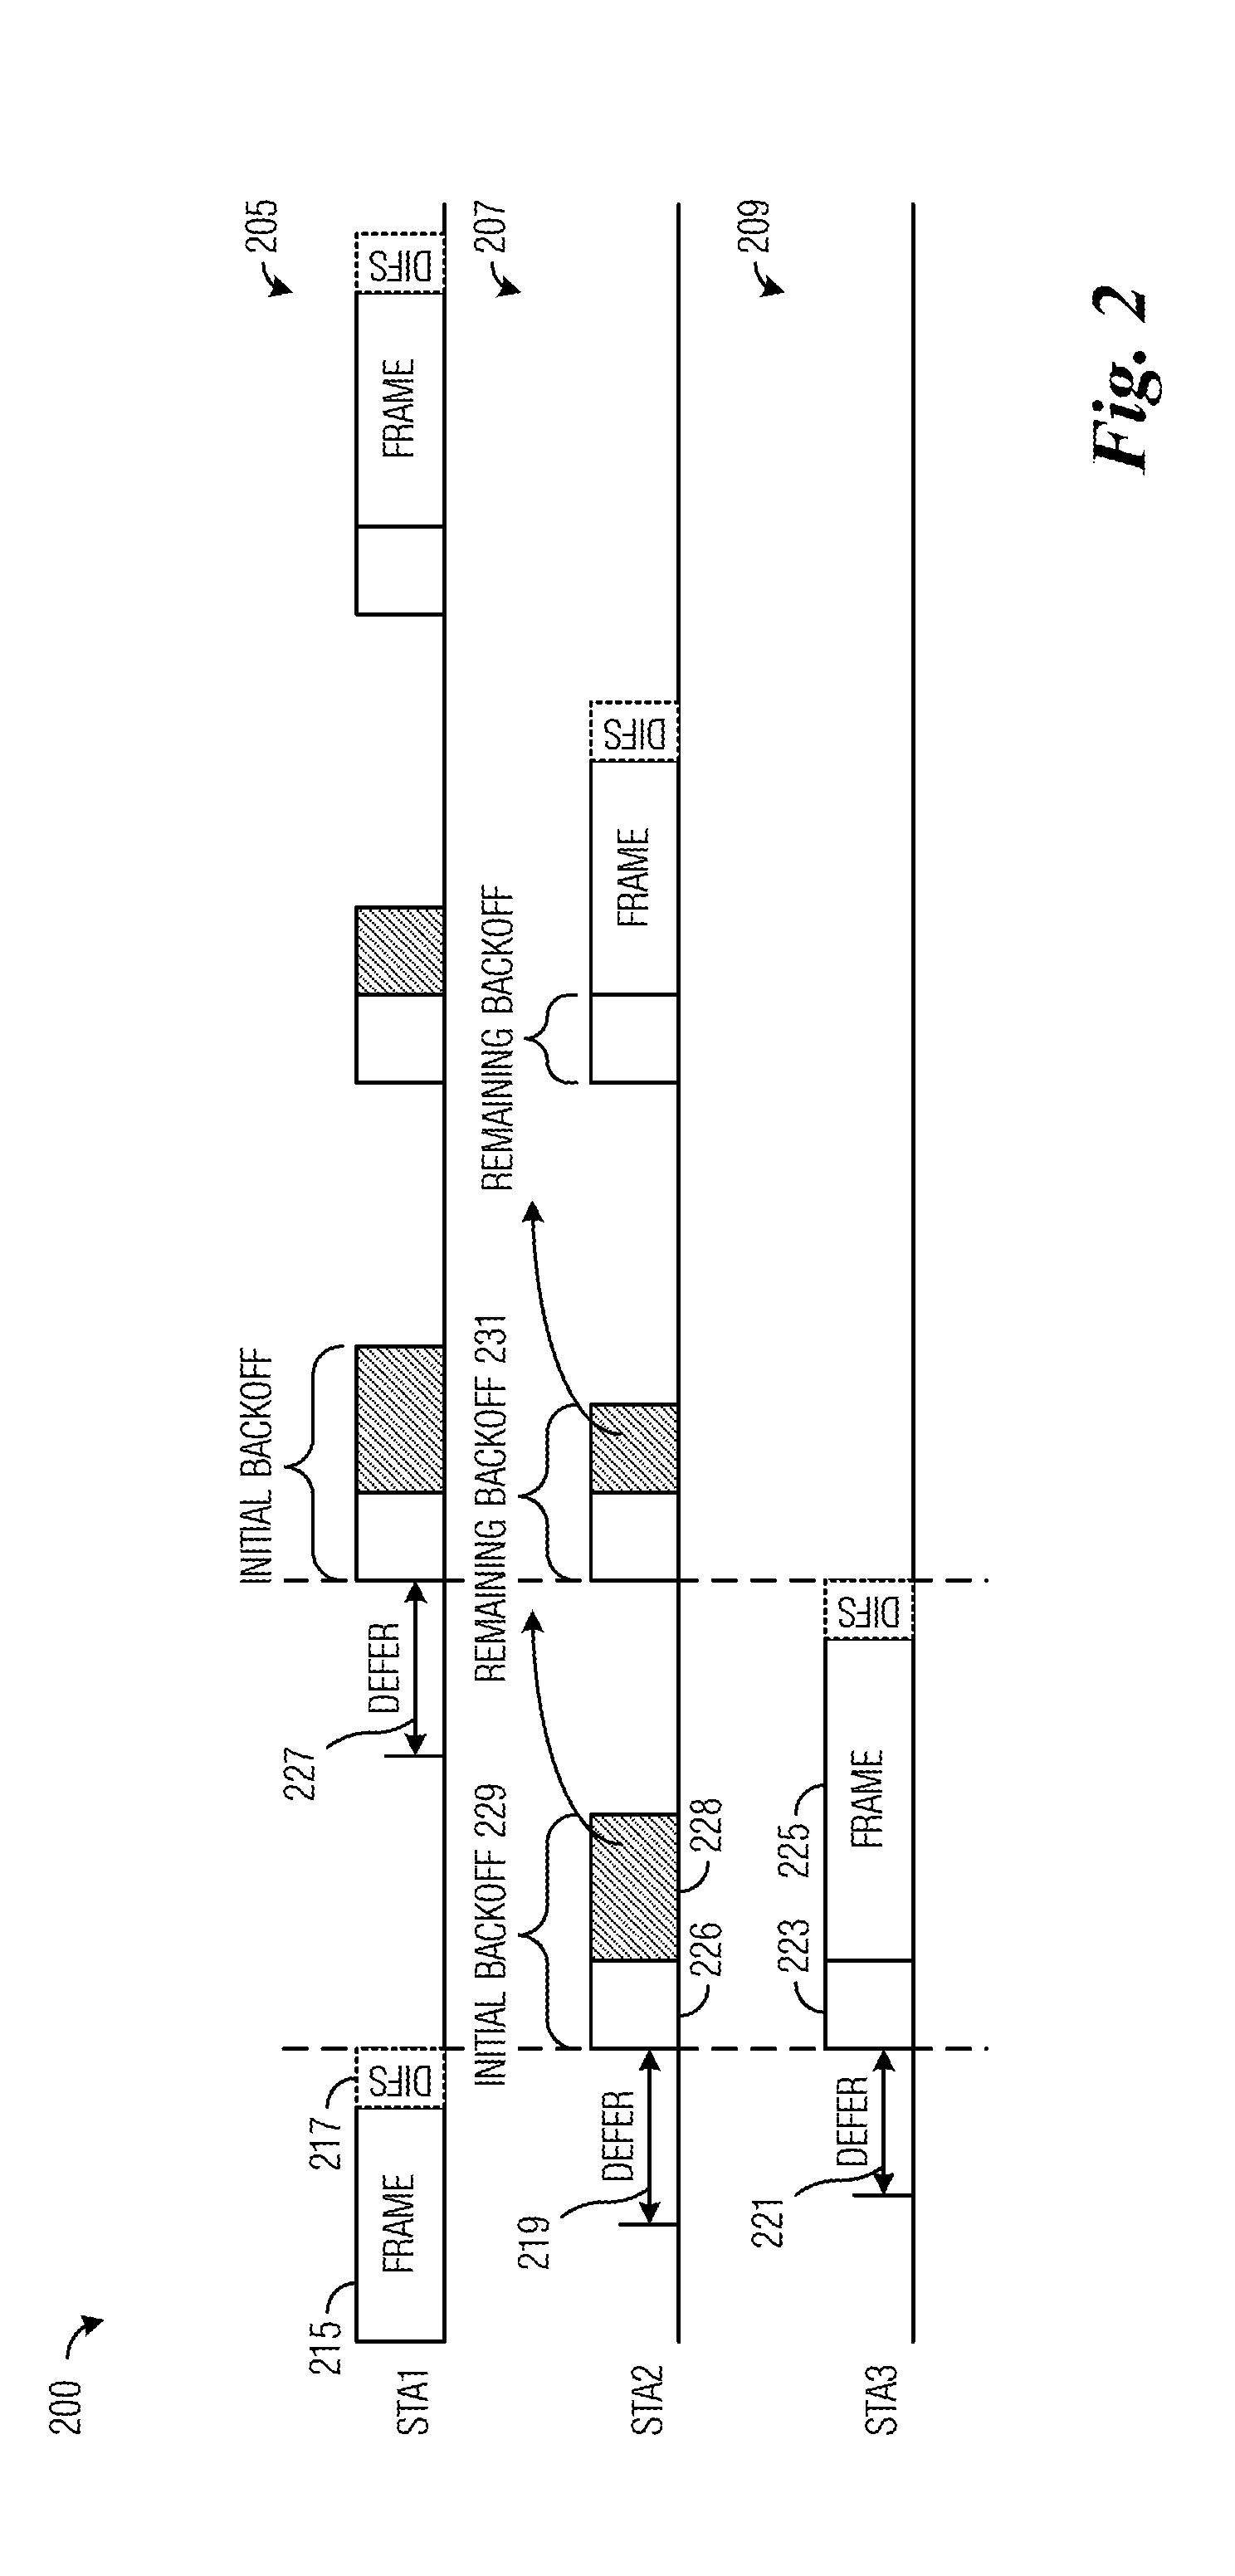 System and Method for Digital Communications with Interference Avoidance